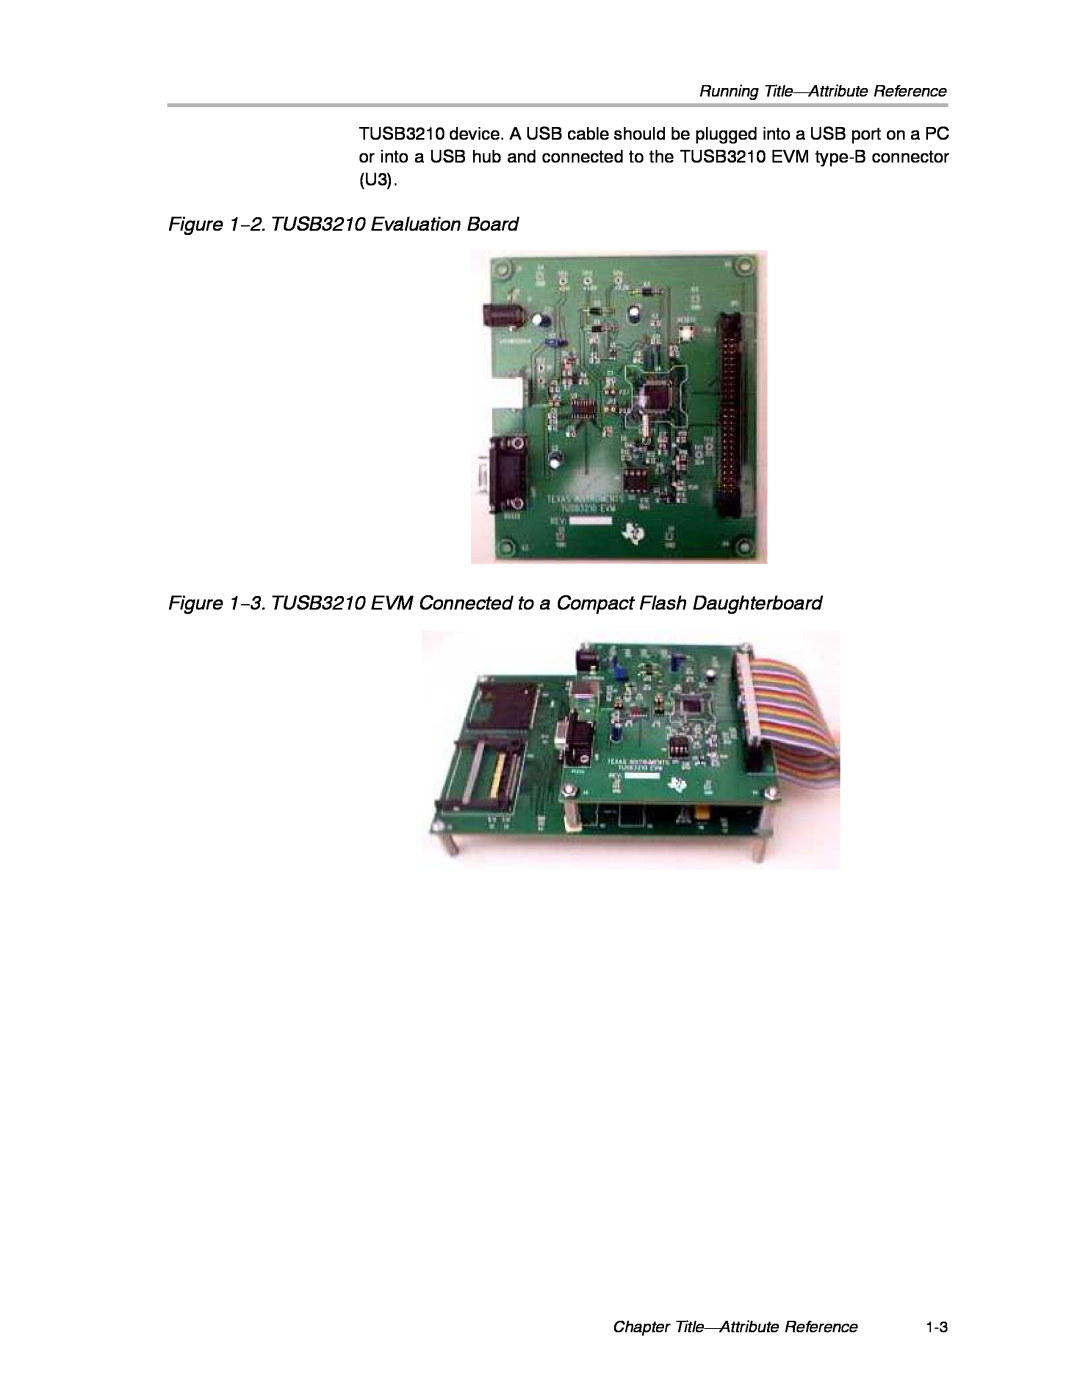 Texas Instruments manual 2. TUSB3210 Evaluation Board, 3. TUSB3210 EVM Connected to a Compact Flash Daughterboard 